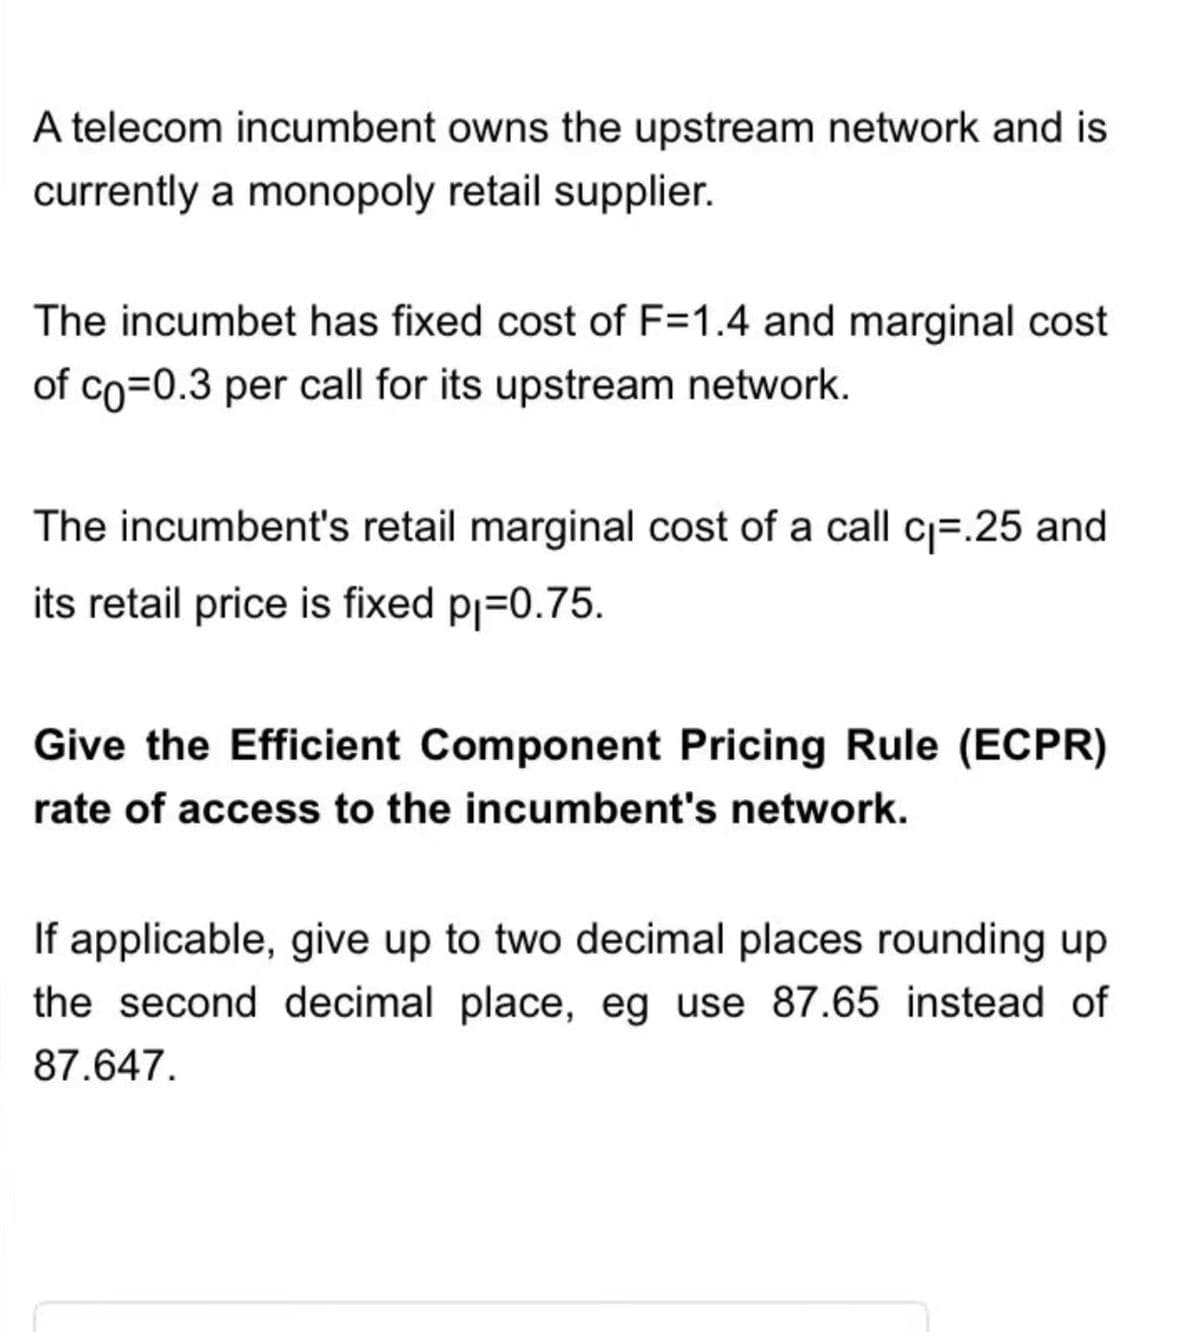 A telecom incumbent owns the upstream network and is
currently a monopoly retail supplier.
The incumbet has fixed cost of F=1.4 and marginal cost
of co=0.3 per call for its upstream network.
The incumbent's retail marginal cost of a call c₁.25 and
its retail price is fixed p₁=0.75.
Give the Efficient Component Pricing Rule (ECPR)
rate of access to the incumbent's network.
If applicable, give up to two decimal places rounding up
the second decimal place, eg use 87.65 instead of
87.647.